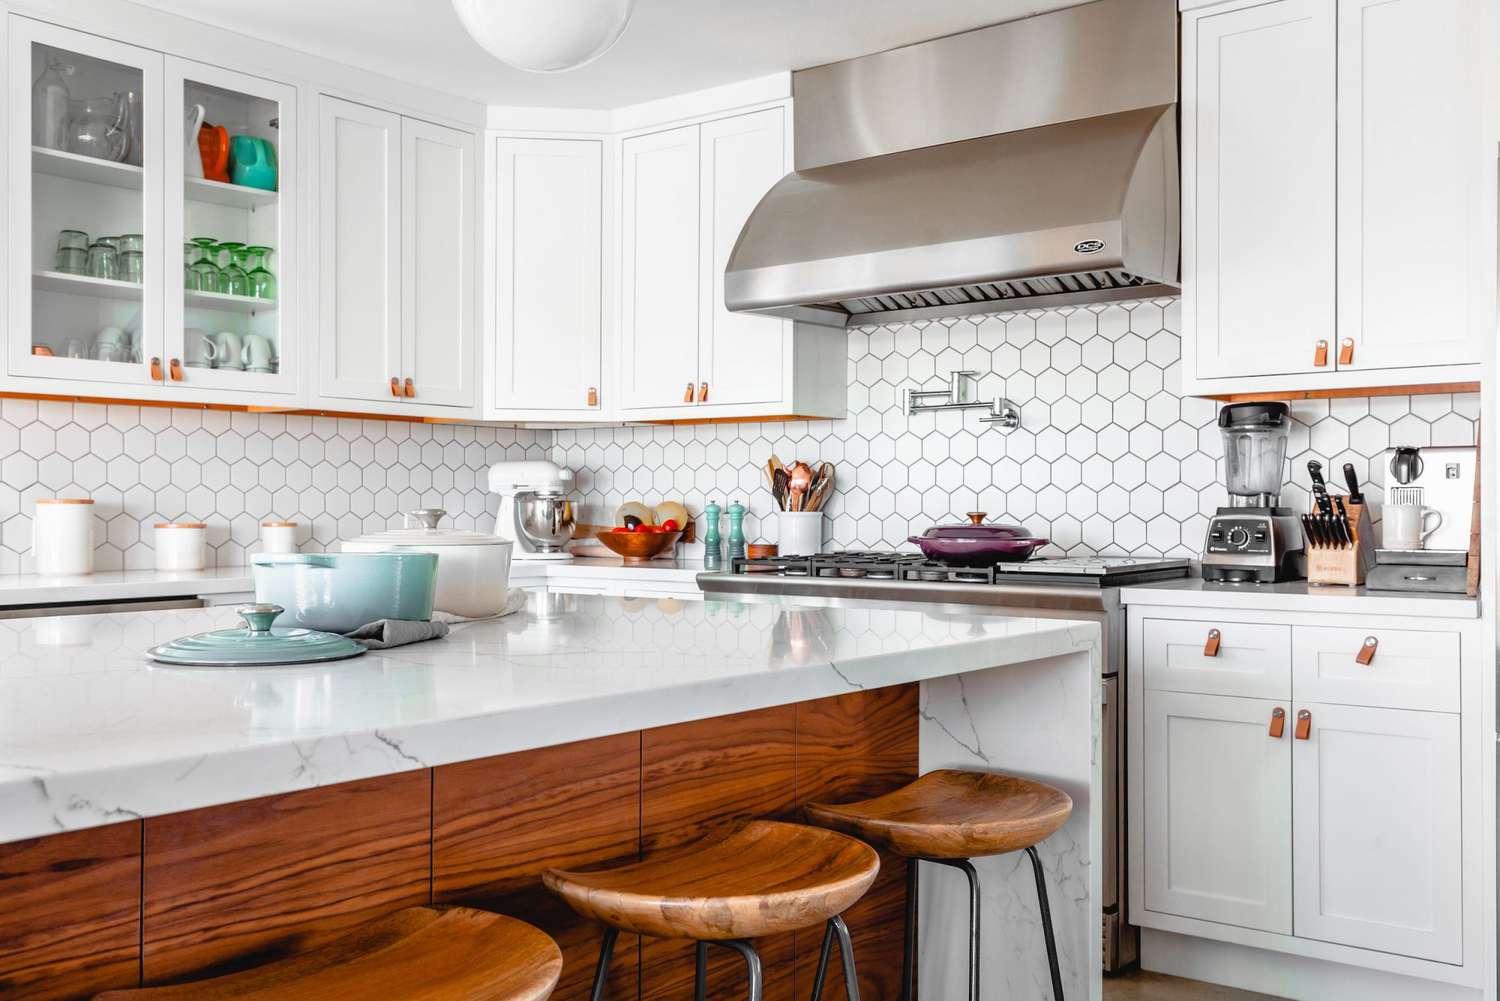 6 Things You Should Know Before Choosing Marble Countertops